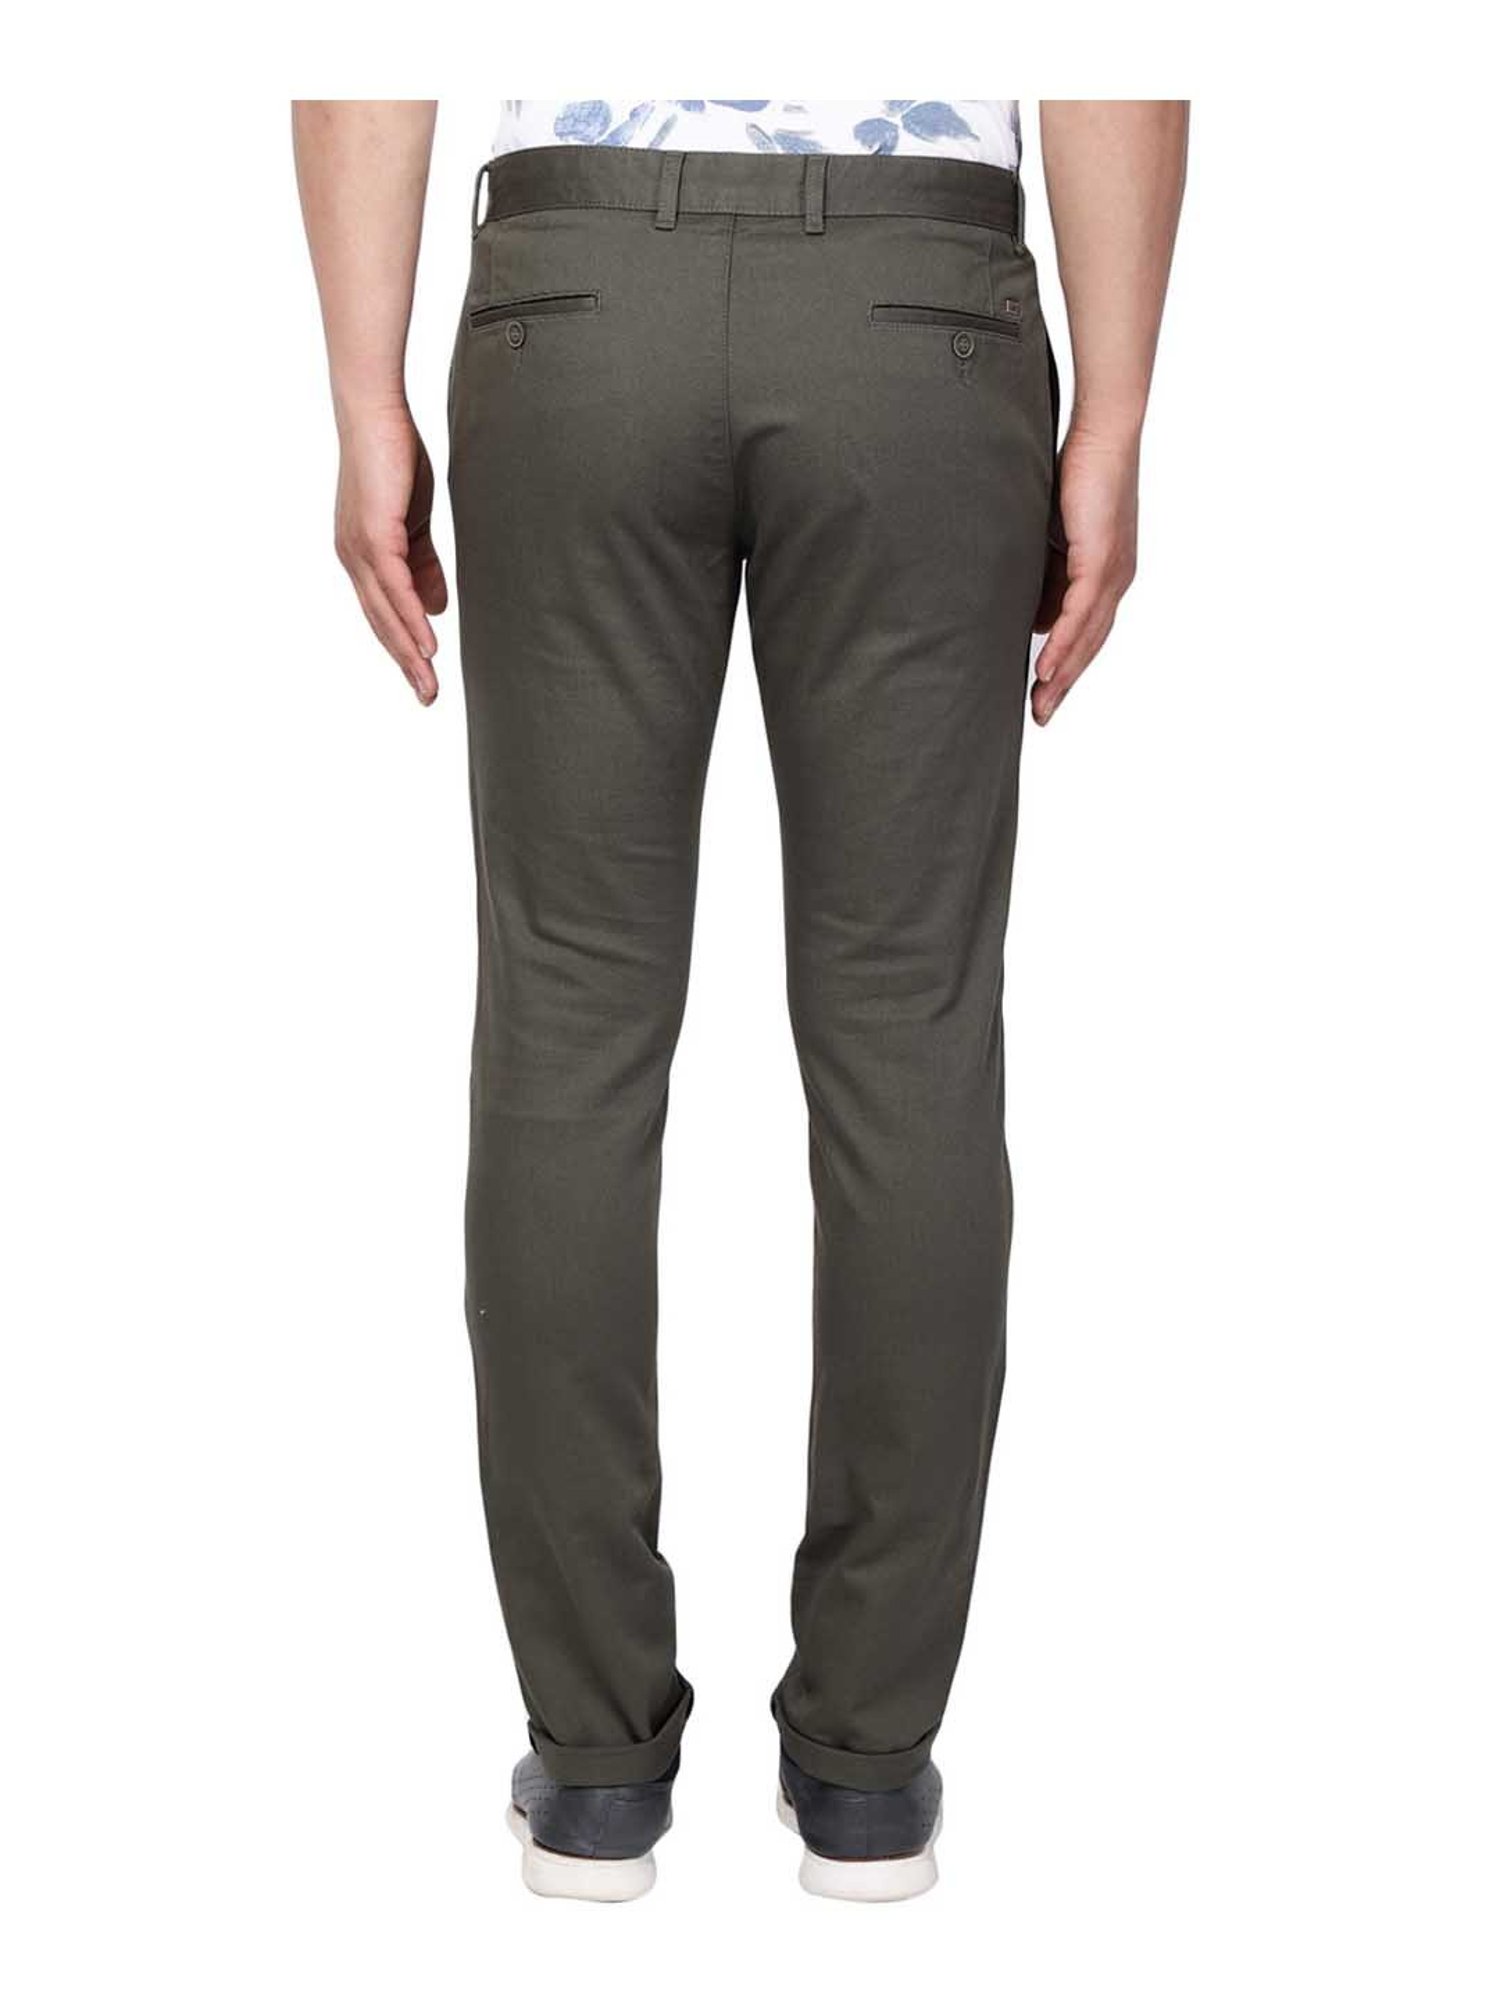 Buy Polo Ralph Lauren Men Dark Olive Solid FlatFront Chinos for Men Online   The Collective